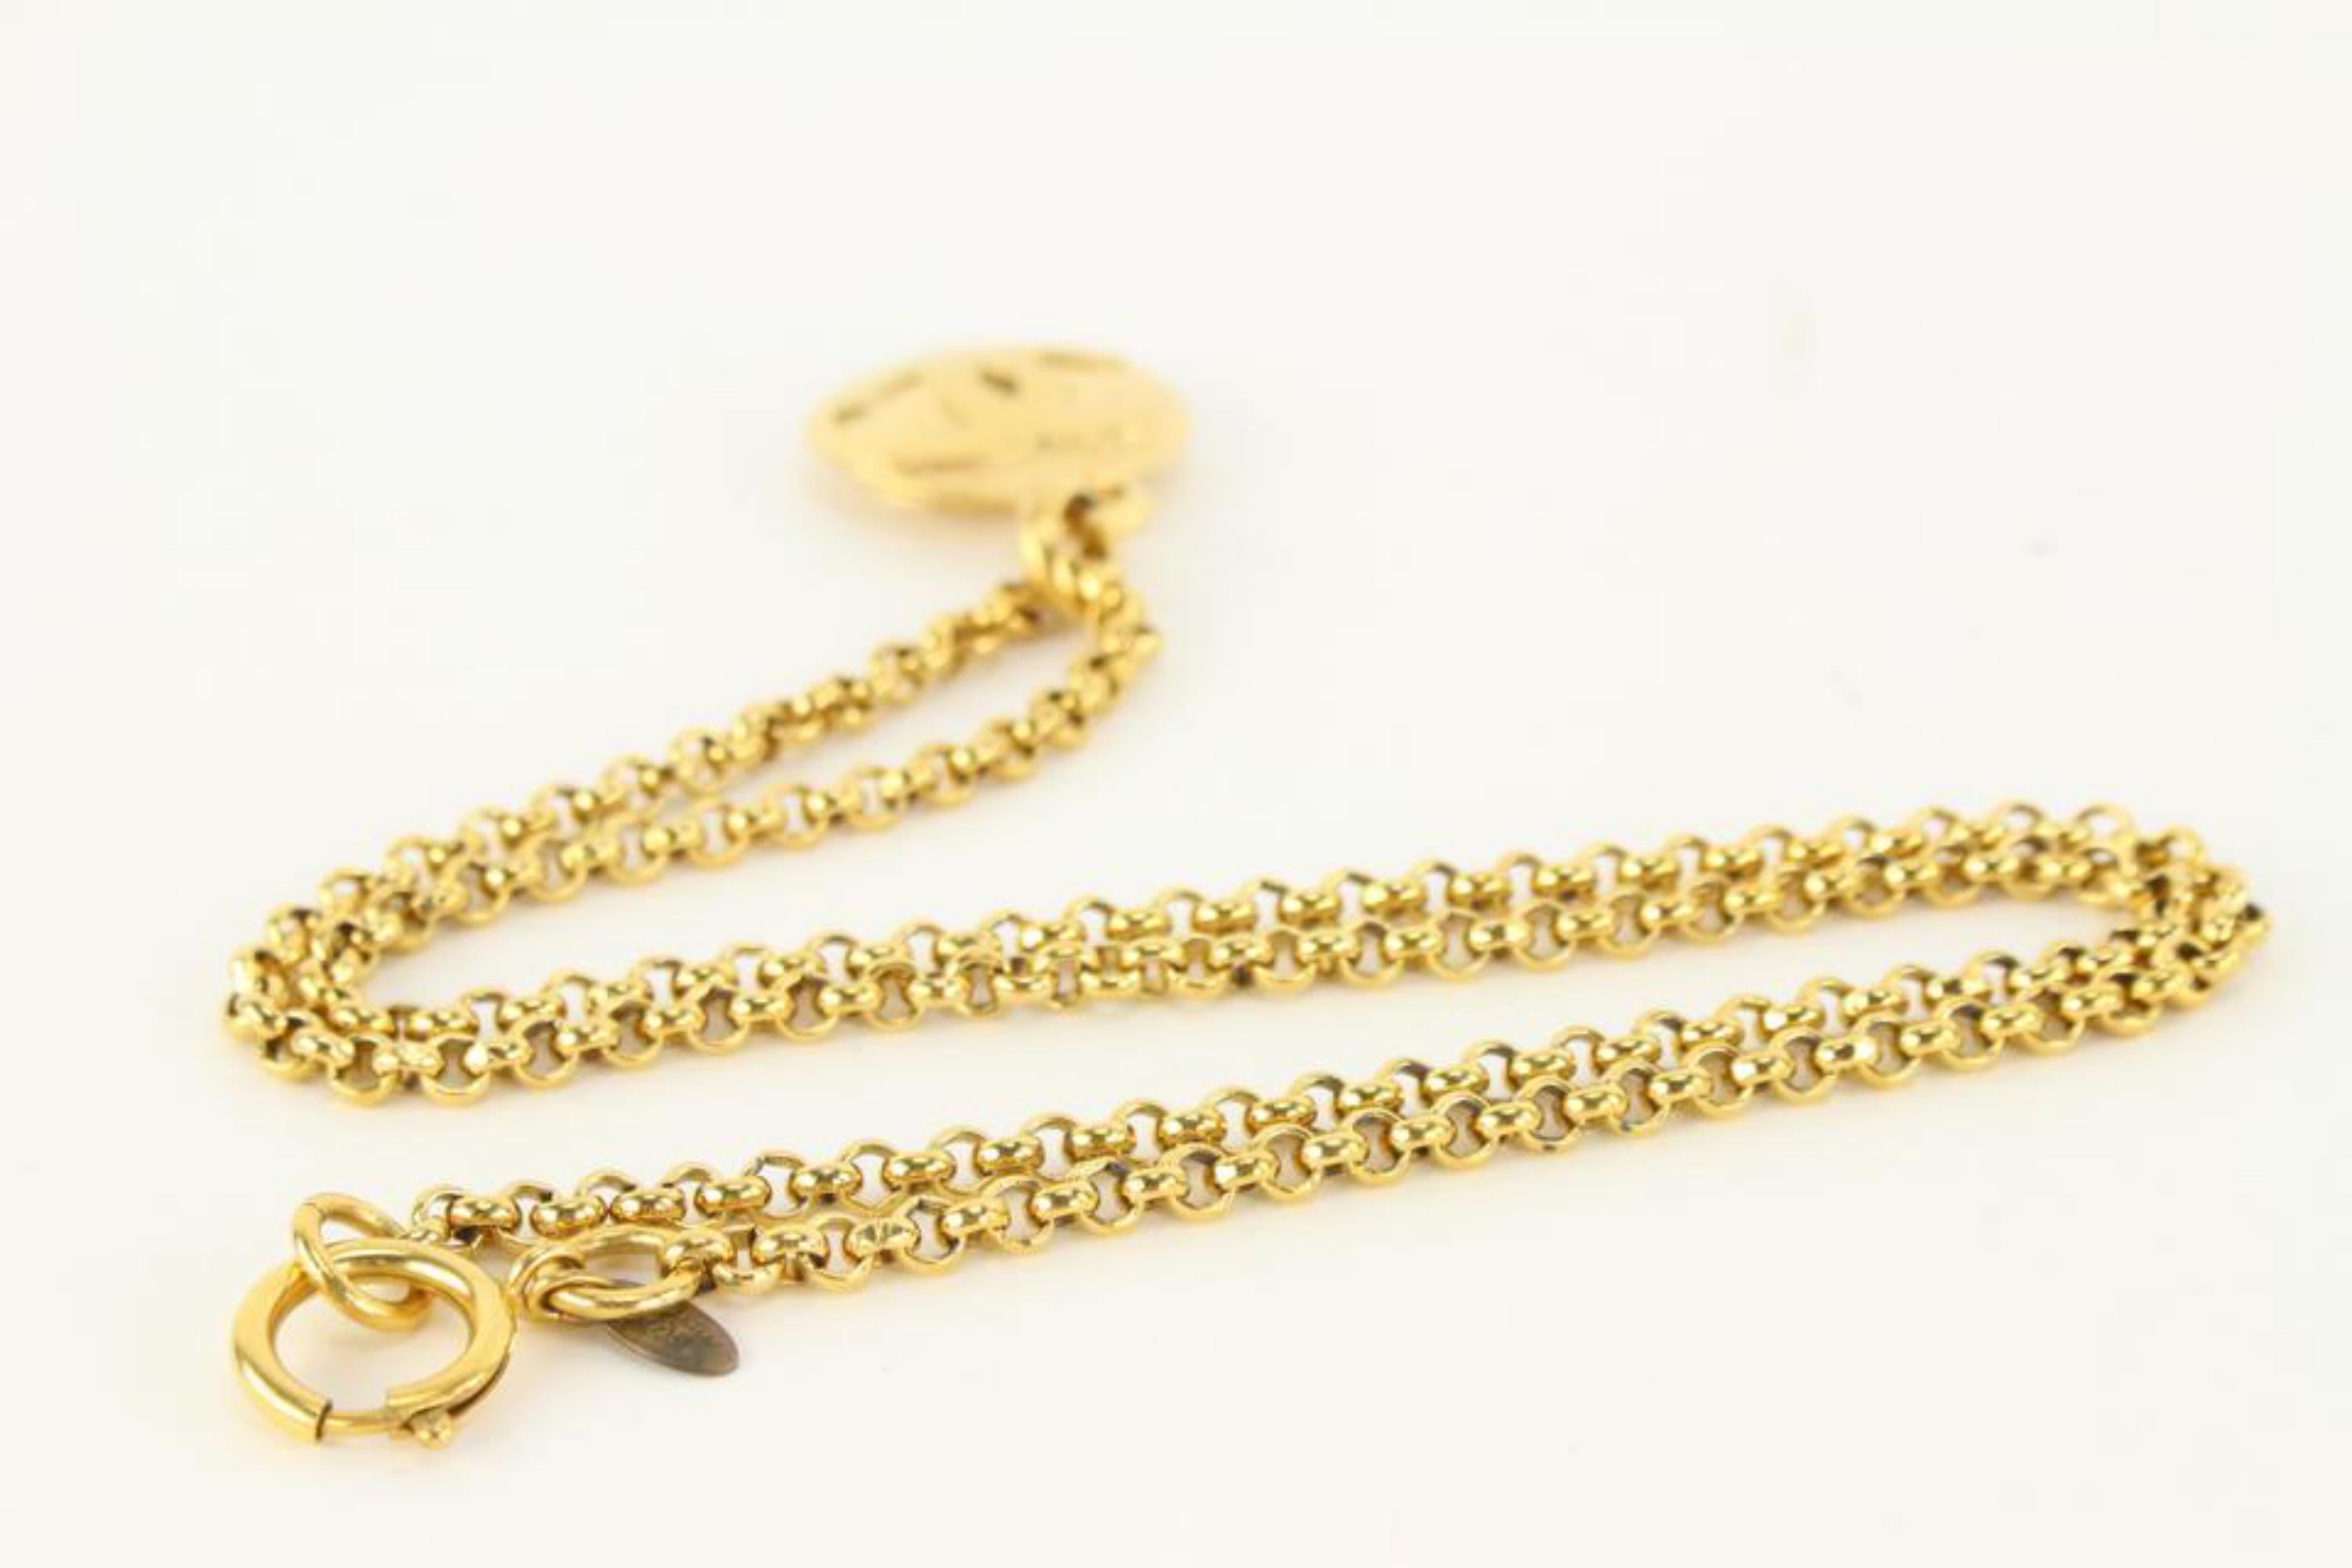 Date Code/Serial Number: N/A
Made In: France
Measurements: 
Chain Length: 34 